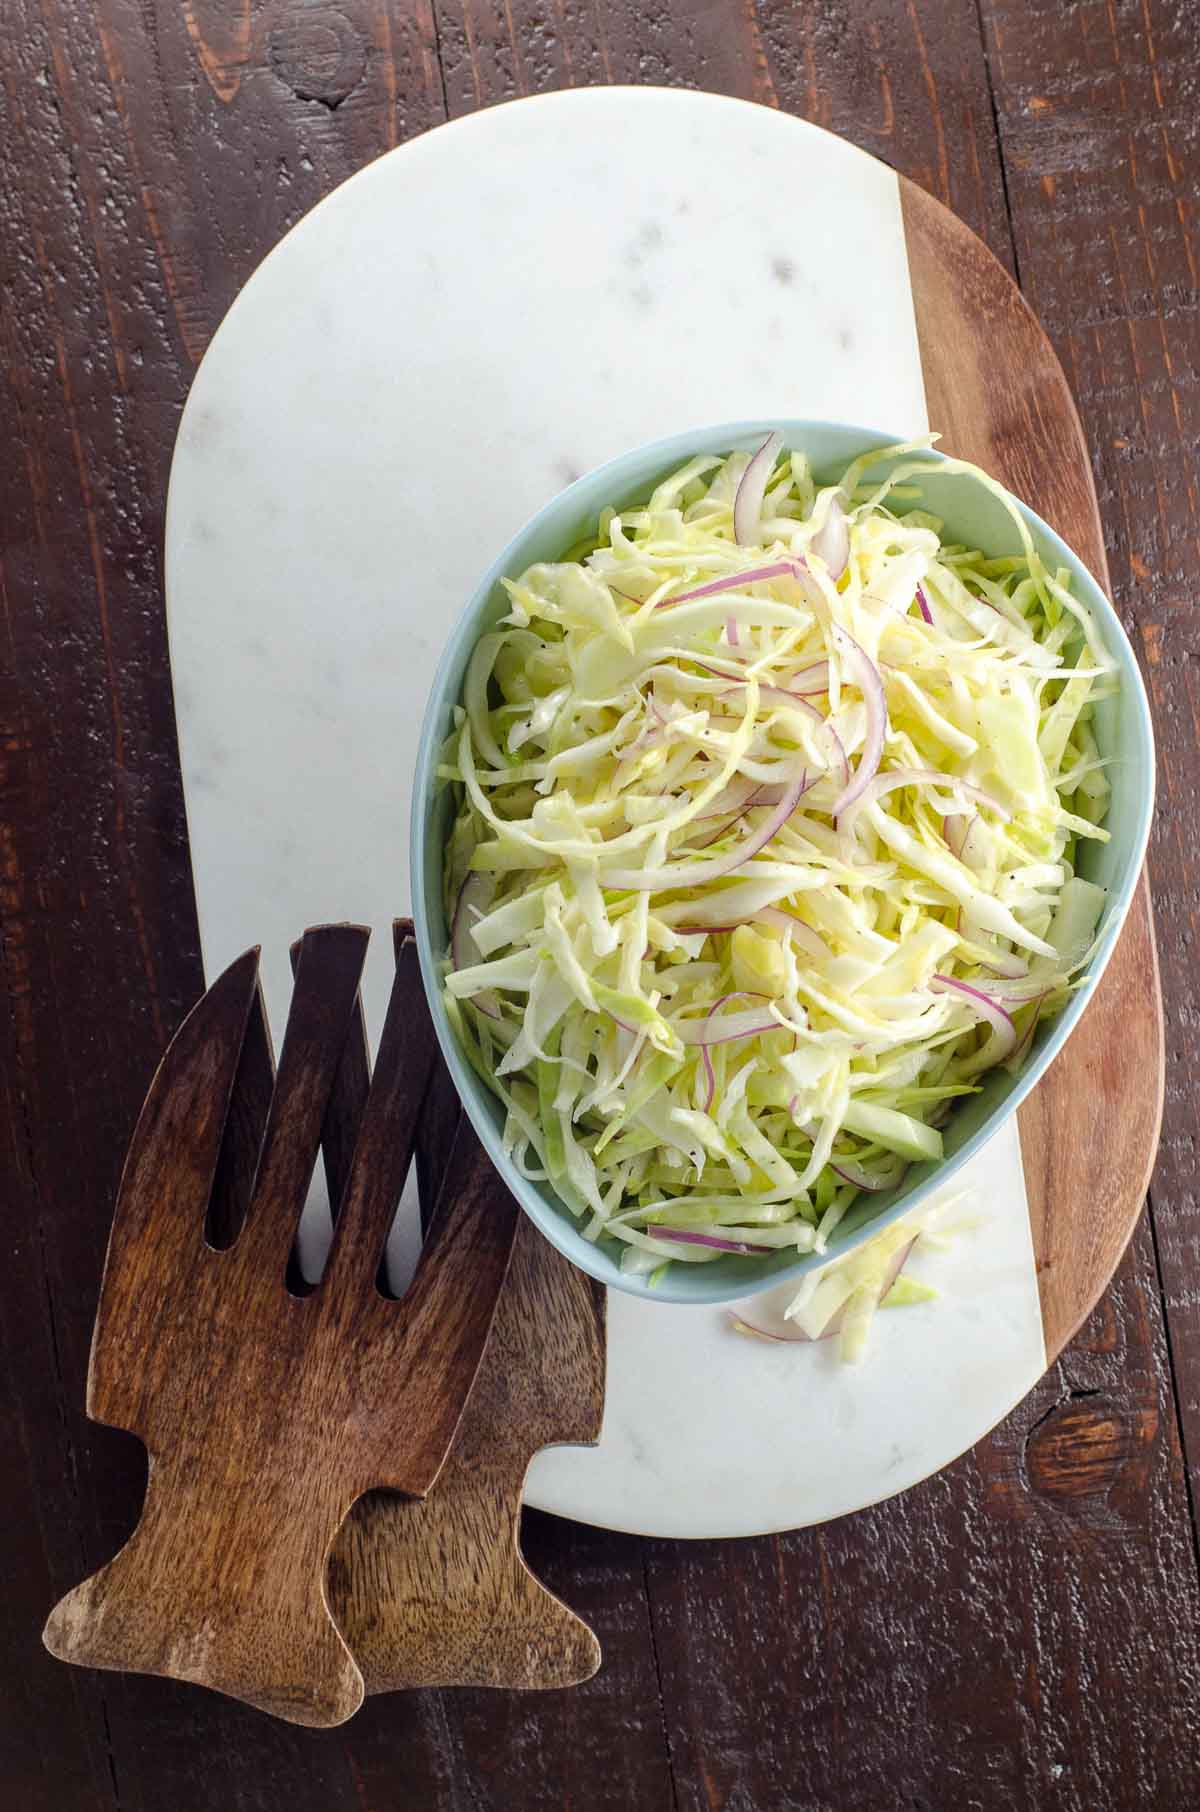 alice waters vegan coleslaw recipe with no mayo in a bowl with salad hands